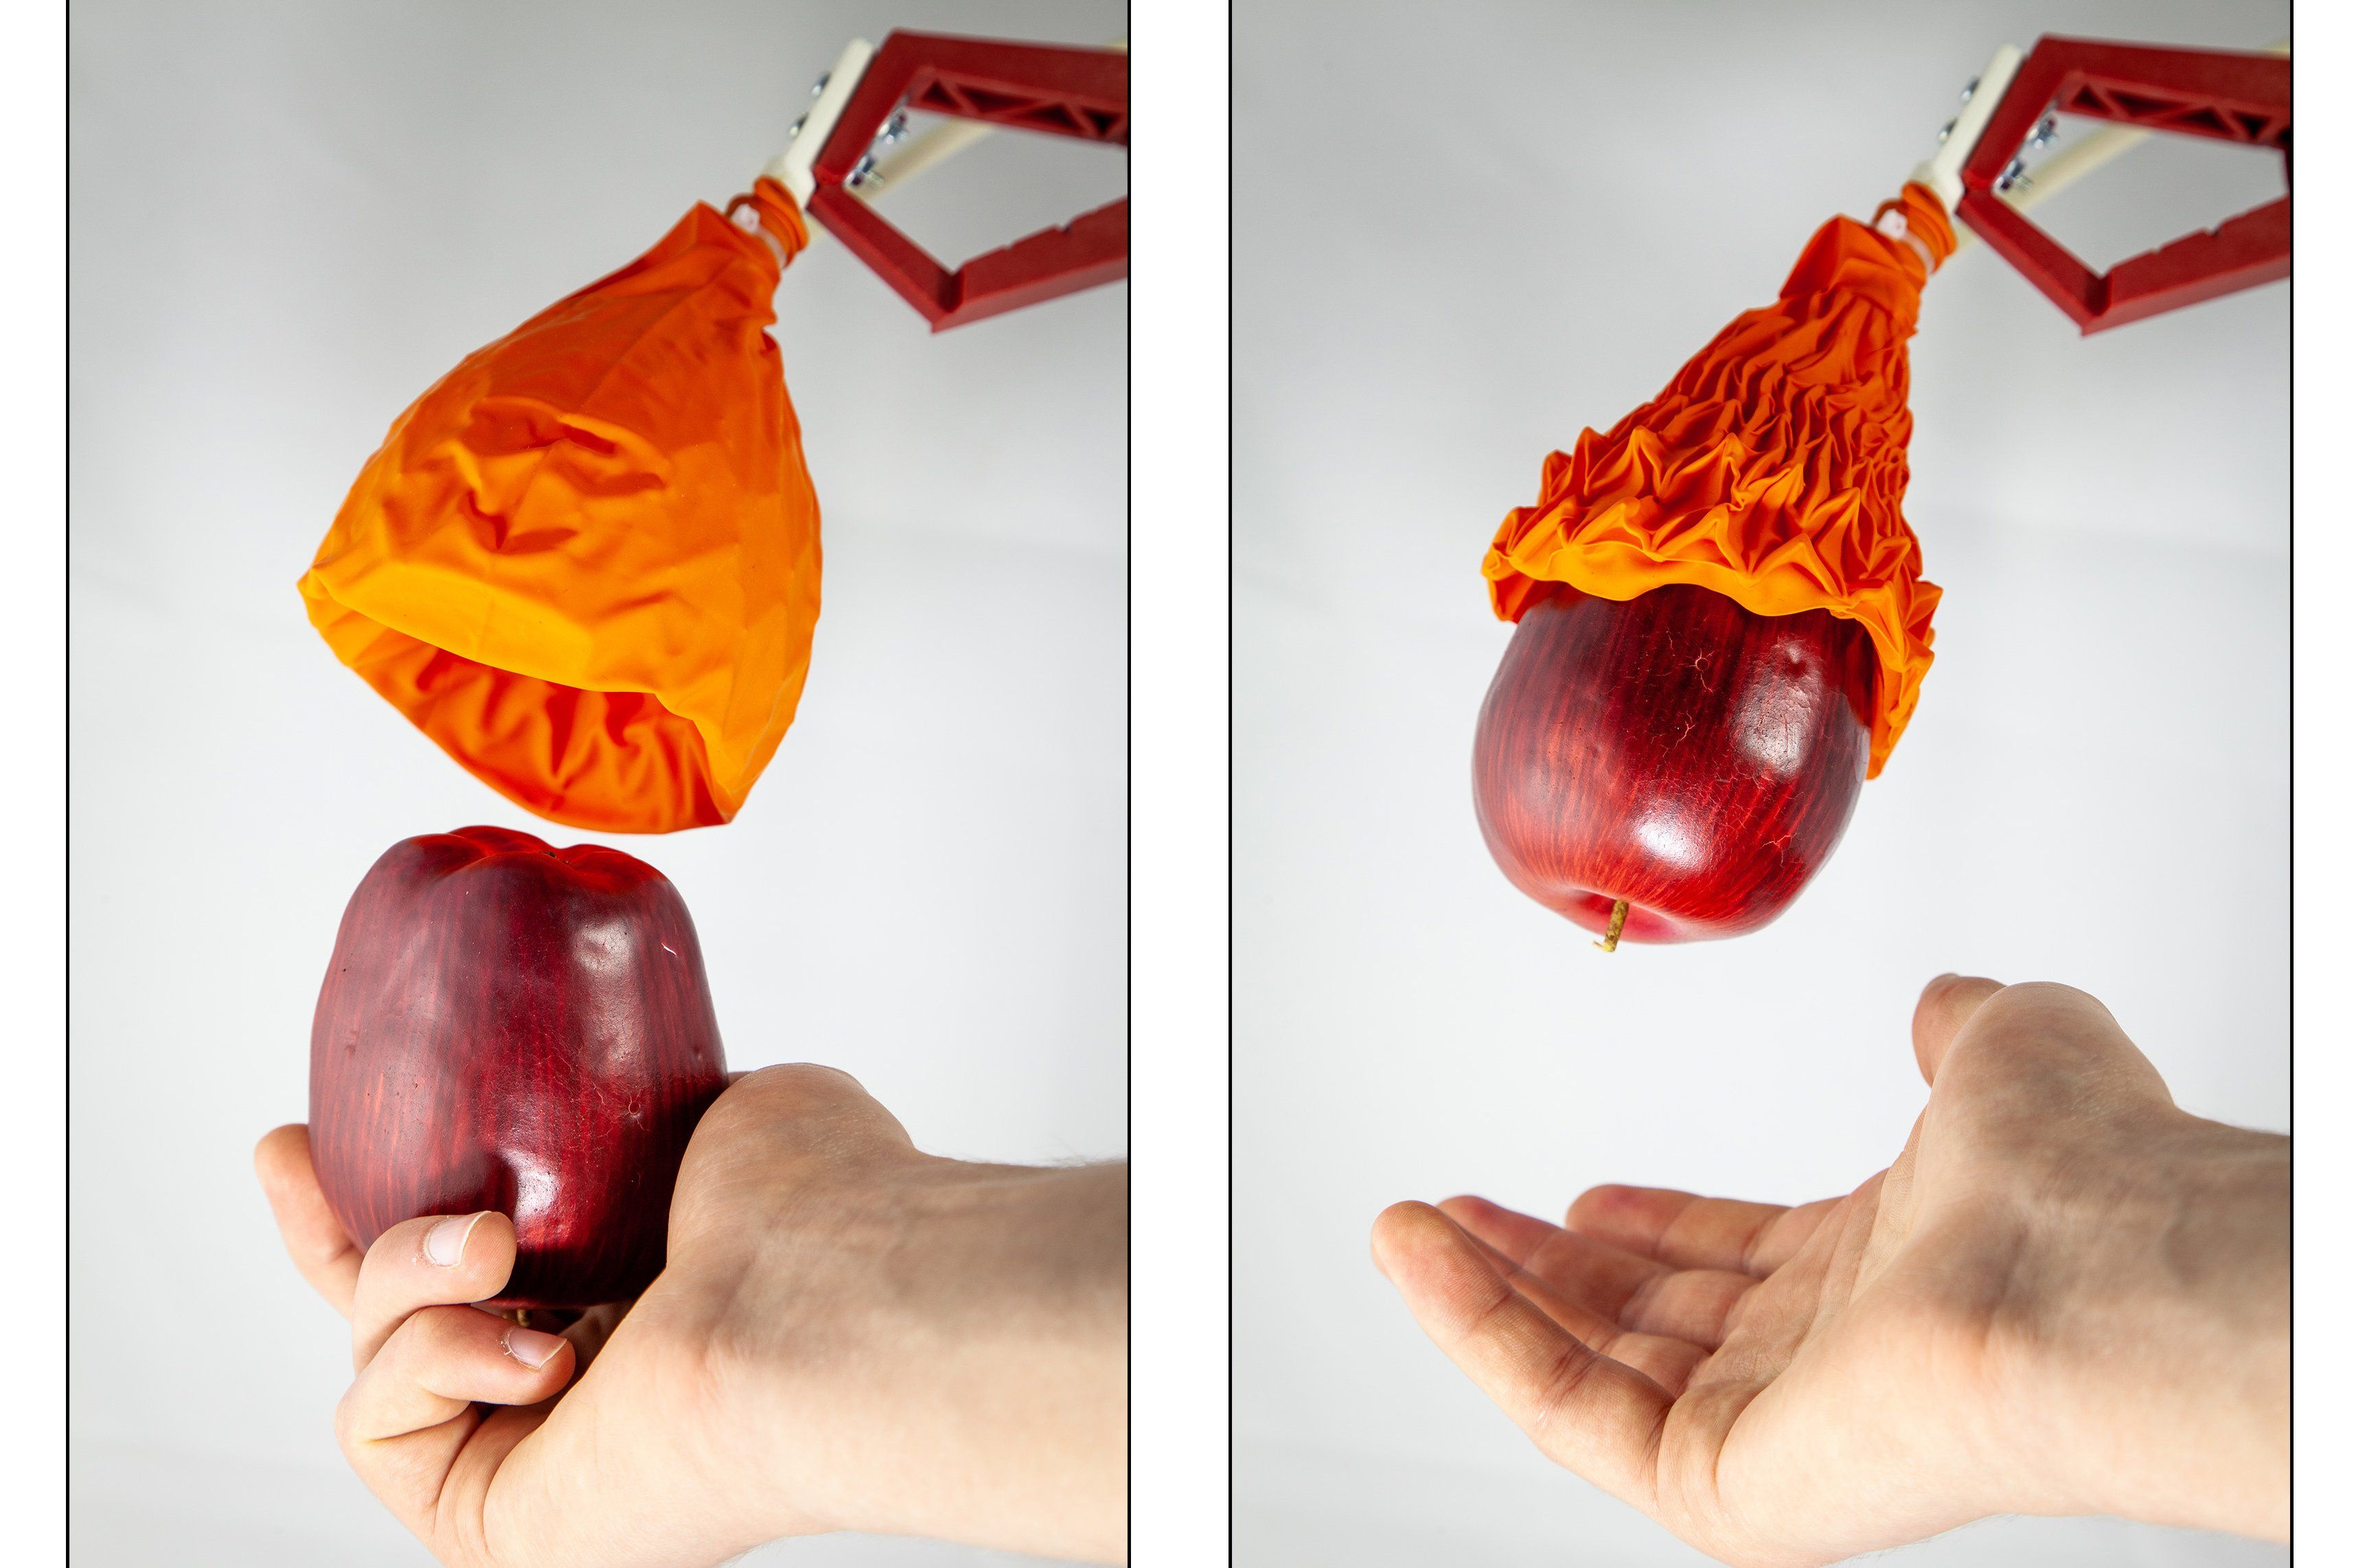 MIT CSAIL develops robotic gripper that can feel what it grabs - The Robot  Report